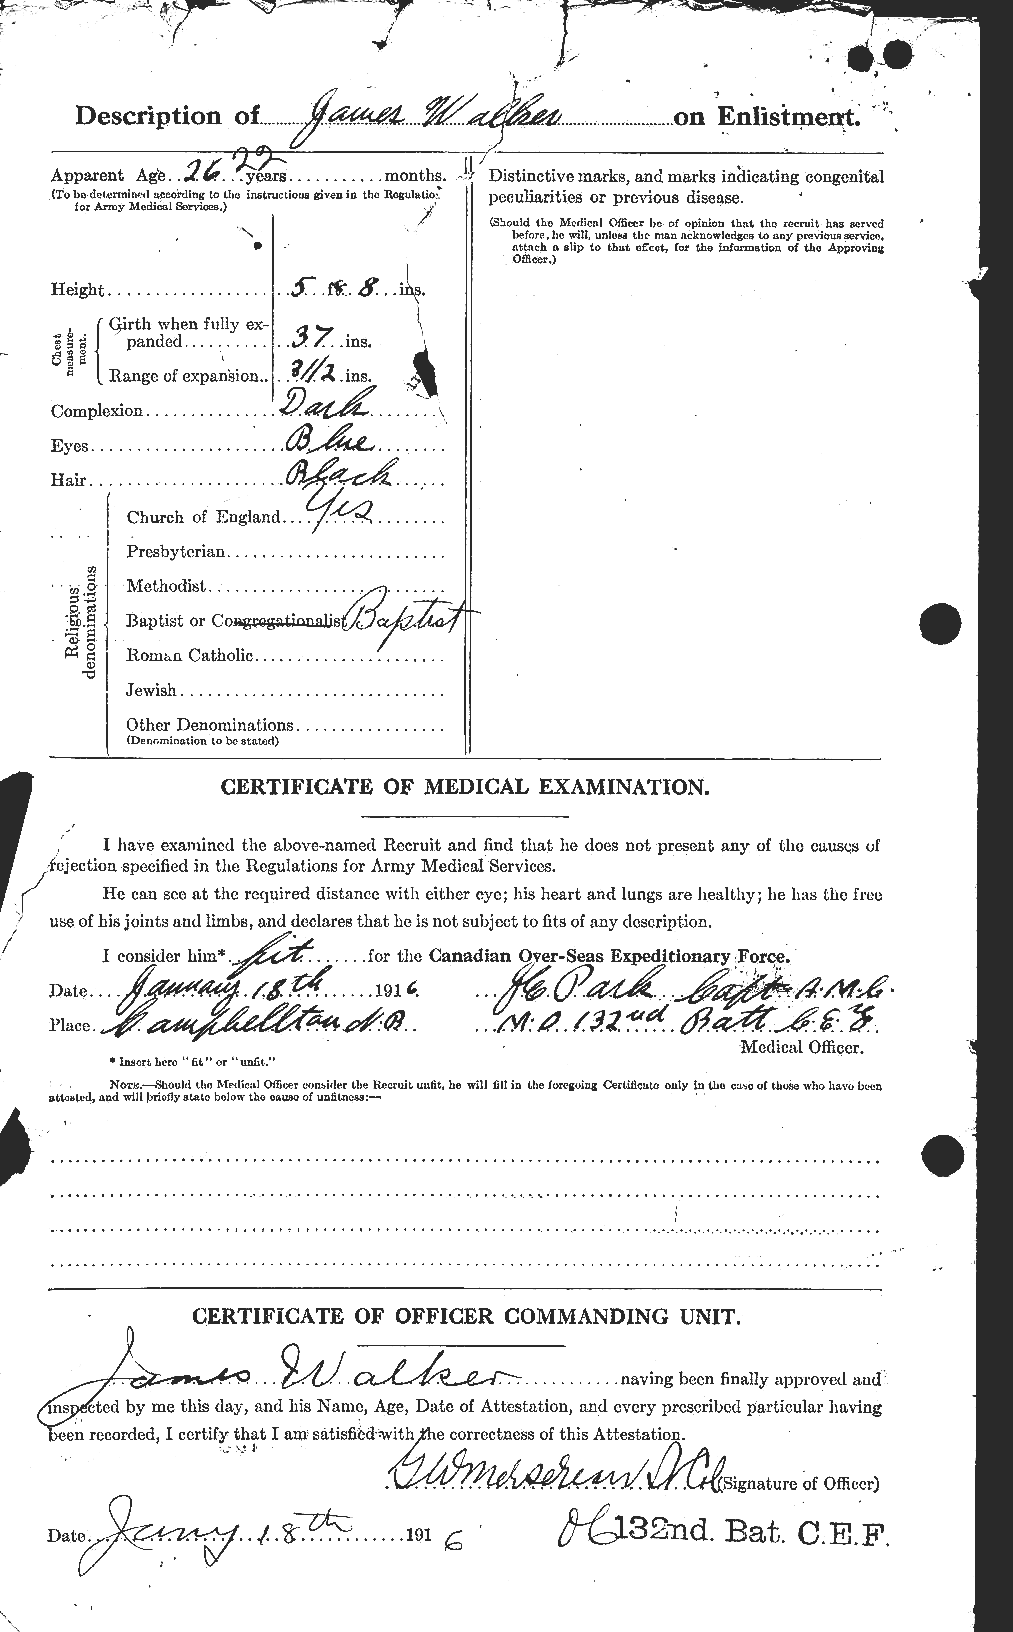 Personnel Records of the First World War - CEF 652947b